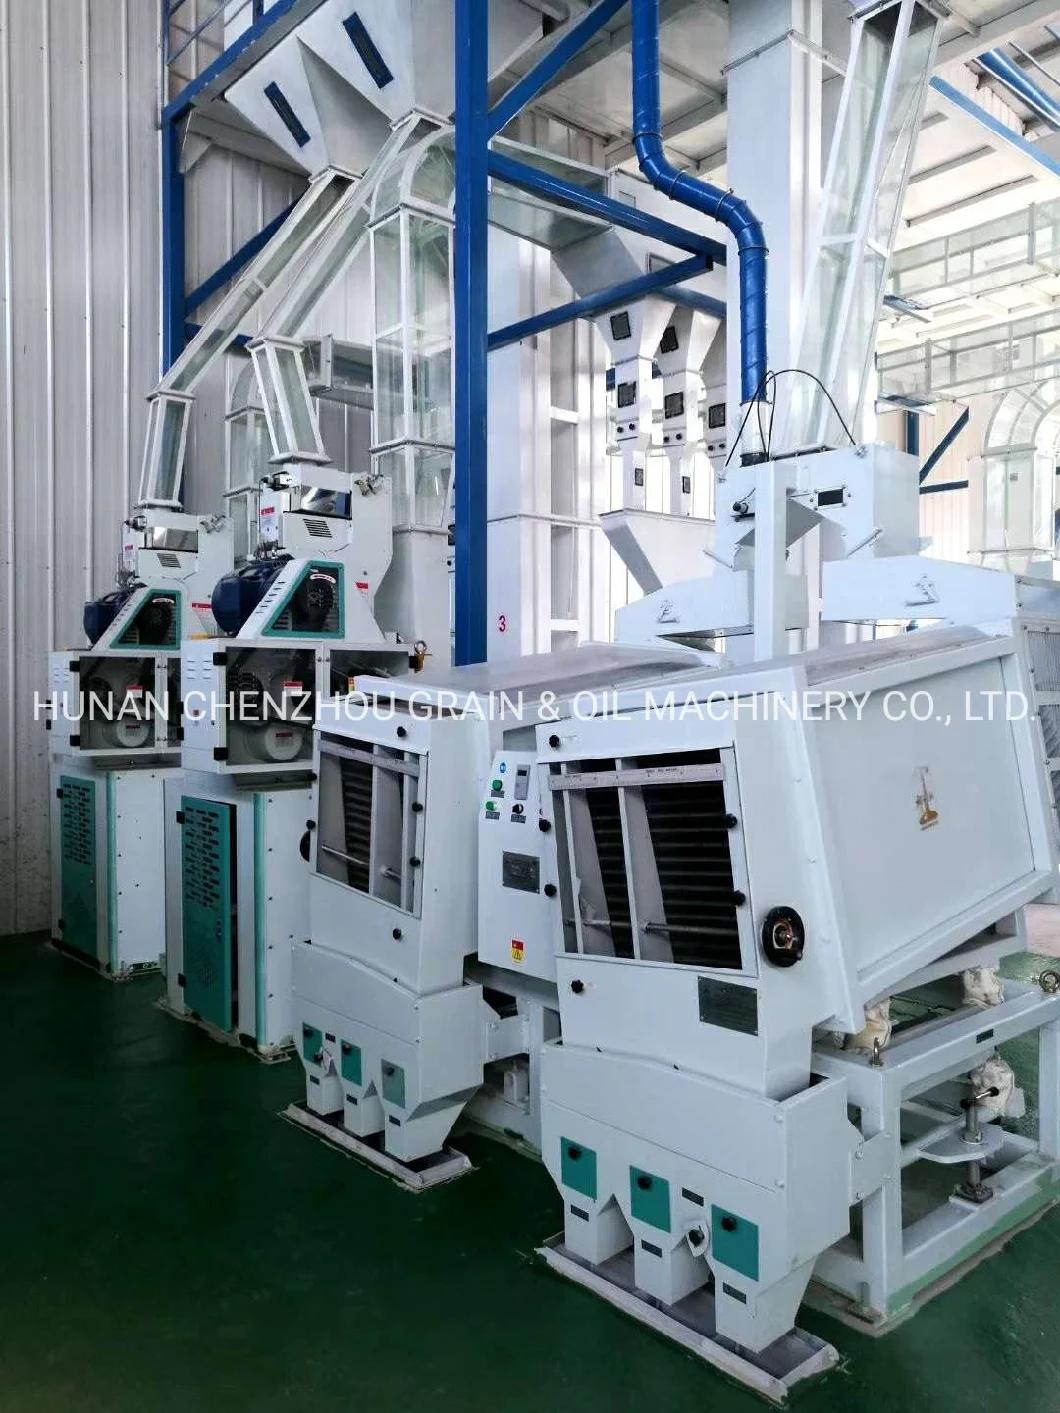 Clj Hot Millet Processing Professional Auto Rice Mill Machine Maize Processing in Egypt